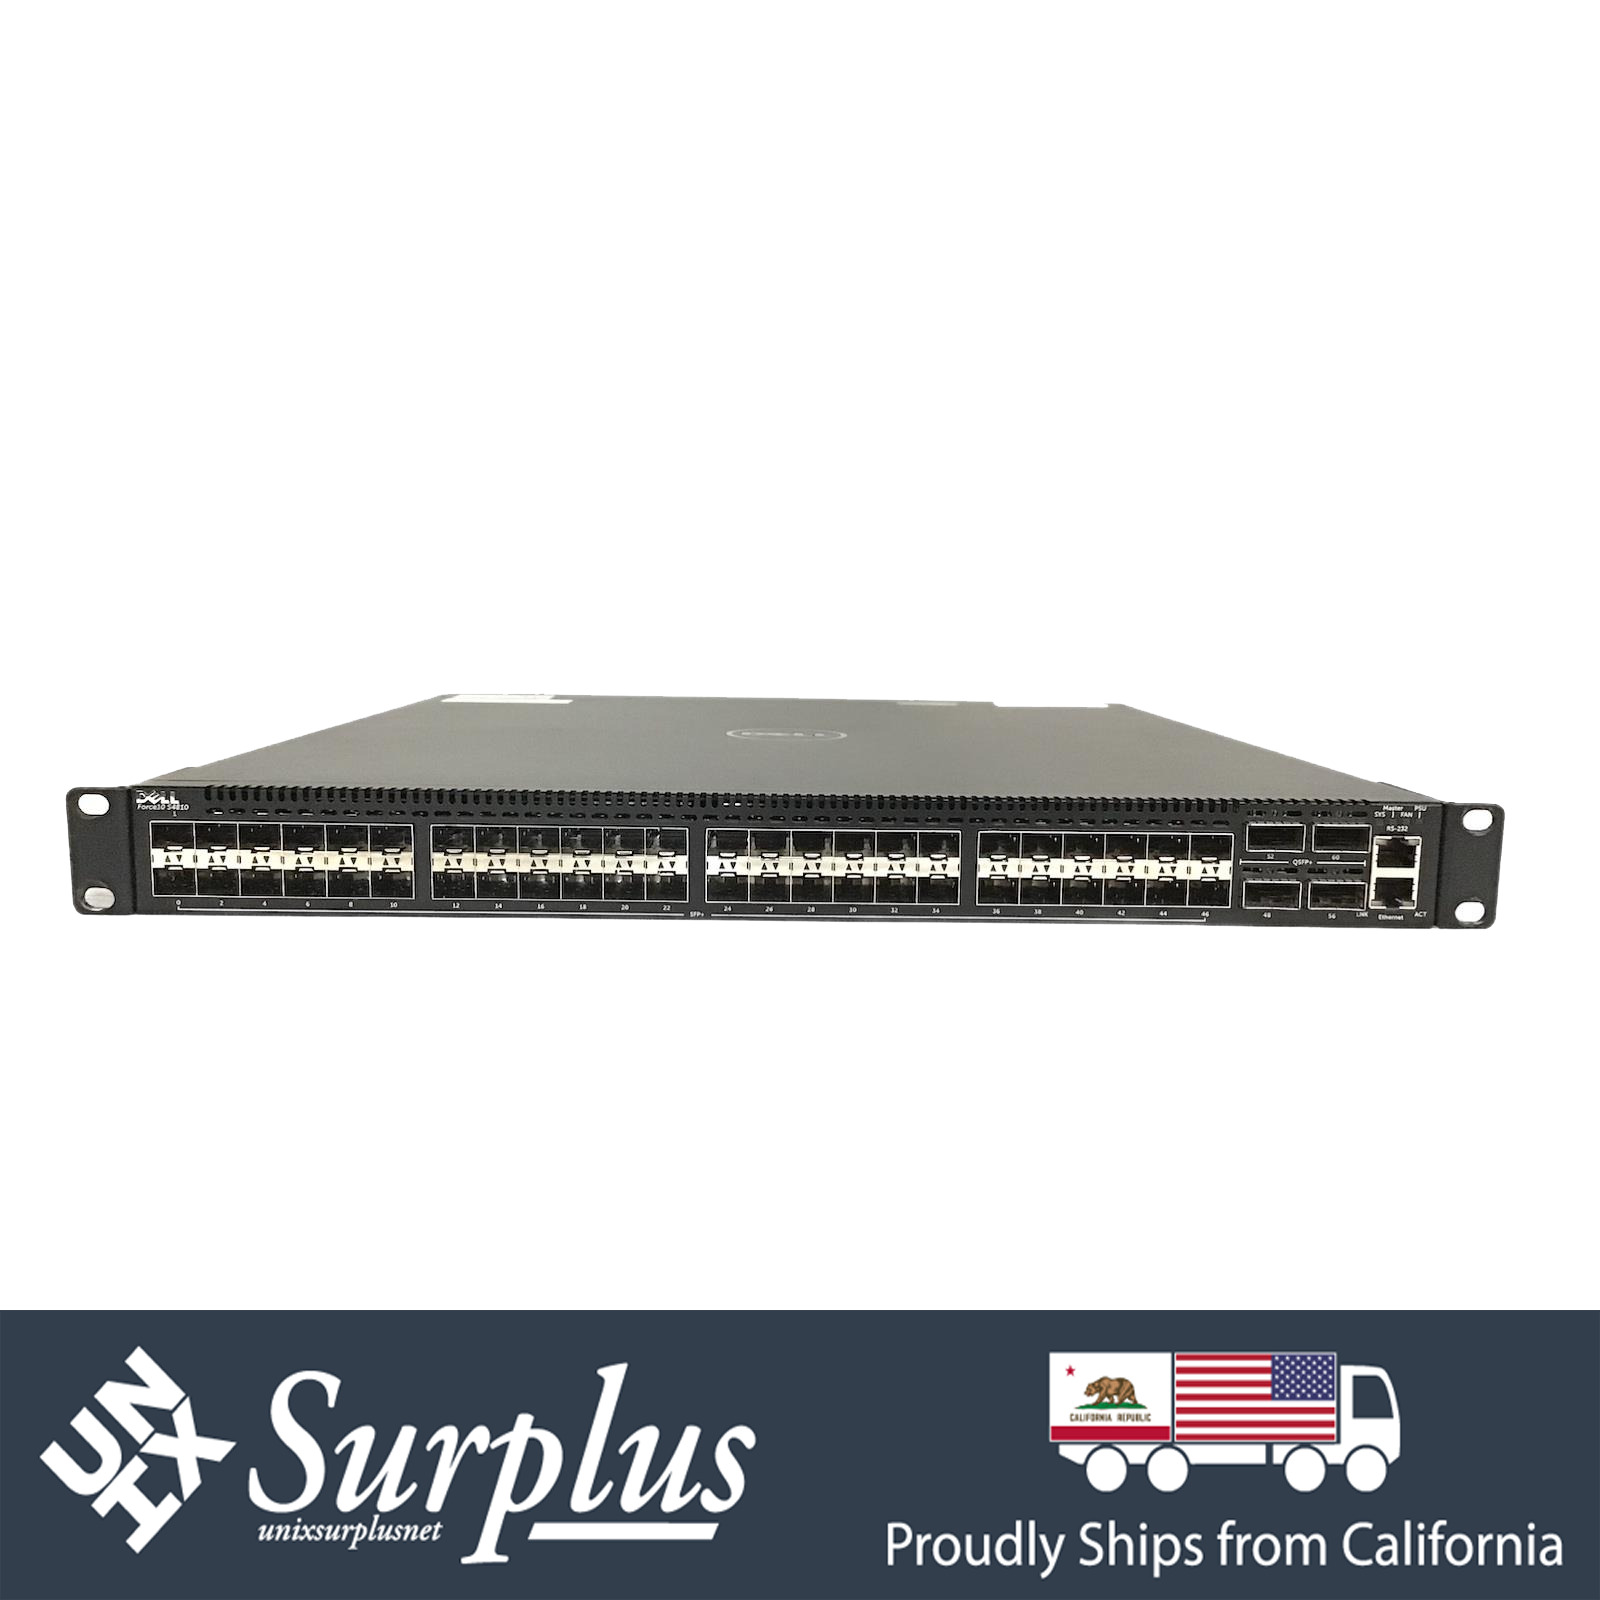 S4810 Dell Force 10 48-Port 10Gbps SFP+ 4-Port 40G QSFP+ Switch 1x PSU w/ Ears